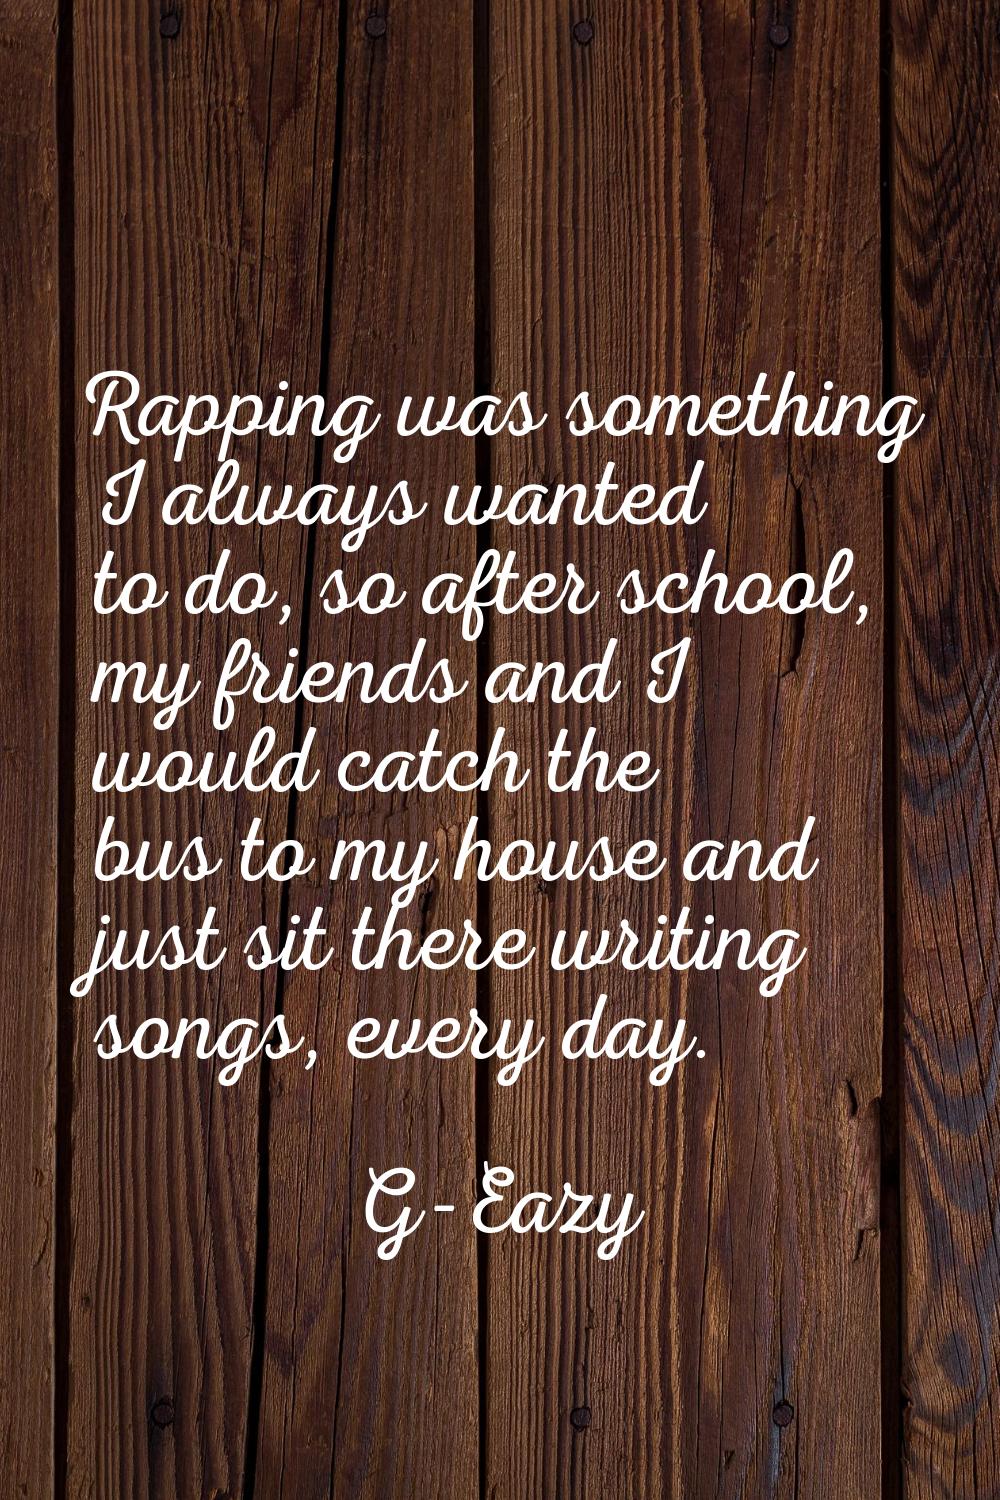 Rapping was something I always wanted to do, so after school, my friends and I would catch the bus 